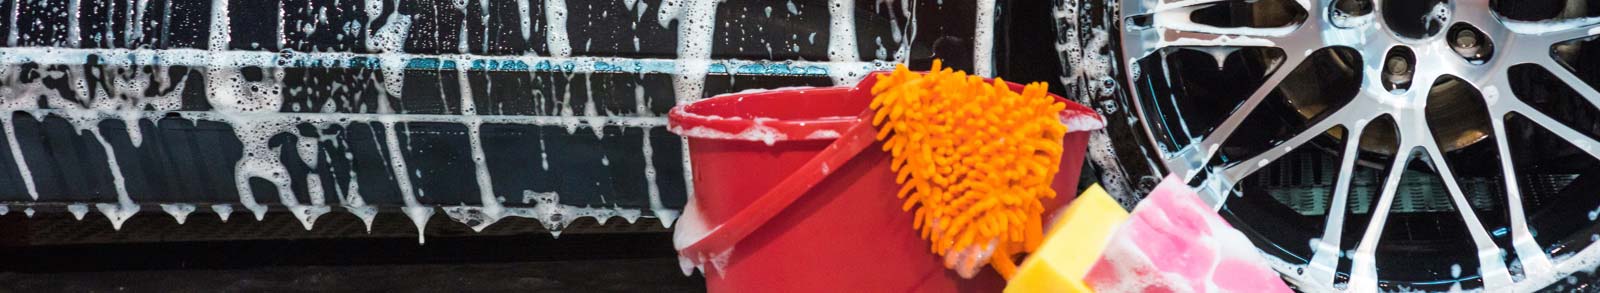 Car with soap suds and a red bucket with washing equipment